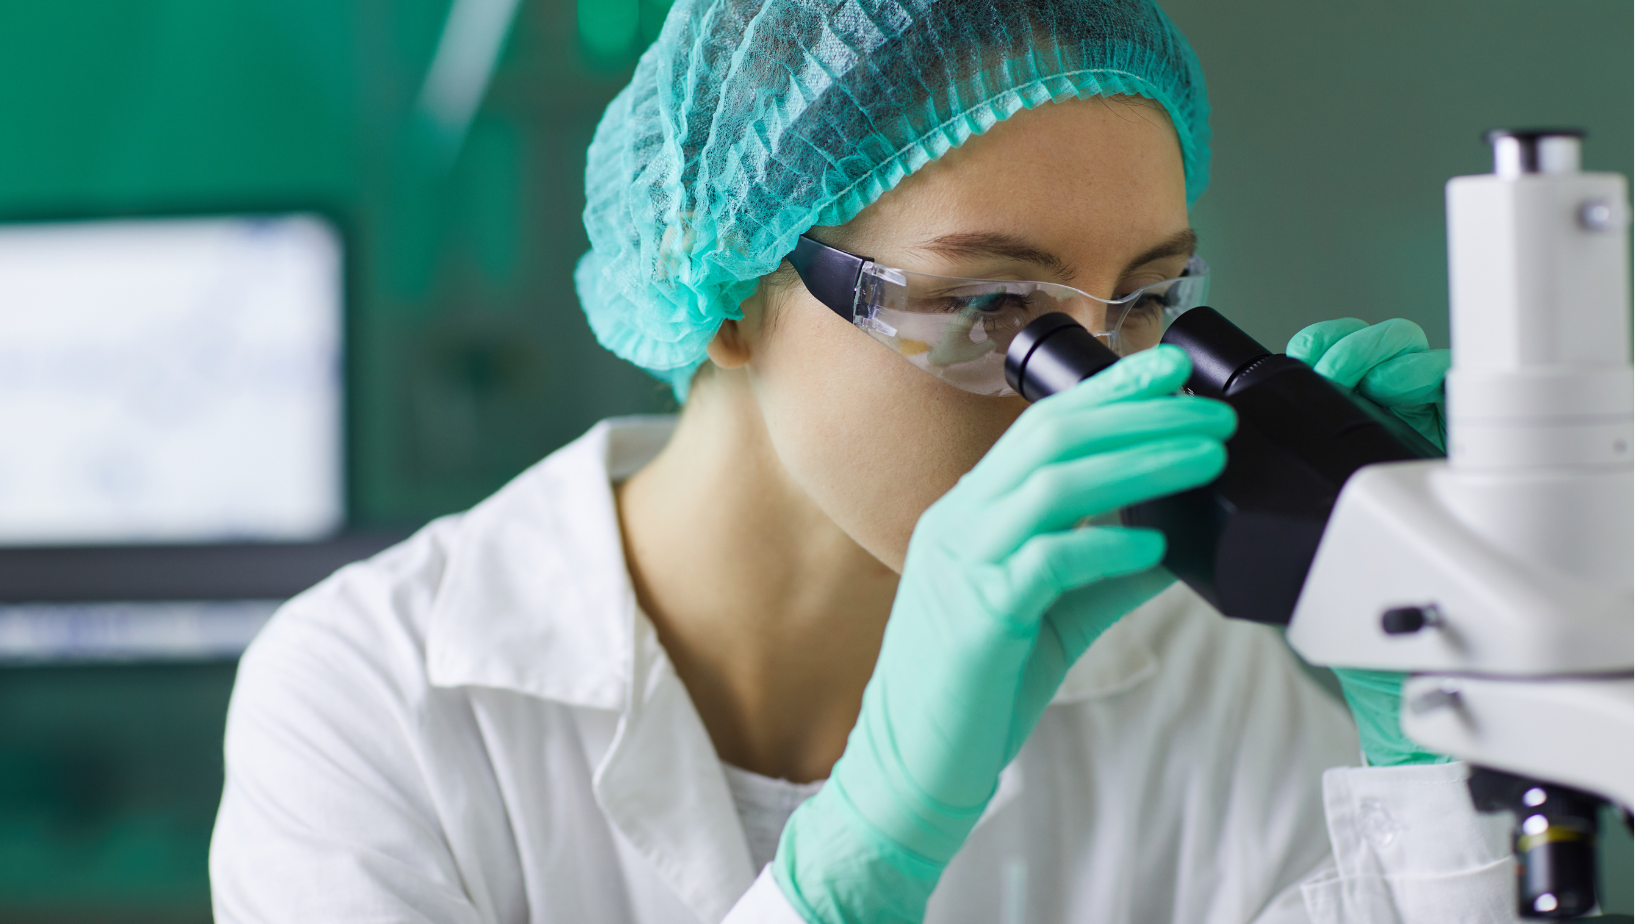 A female scientist is looking through a microscope in a laboratory.